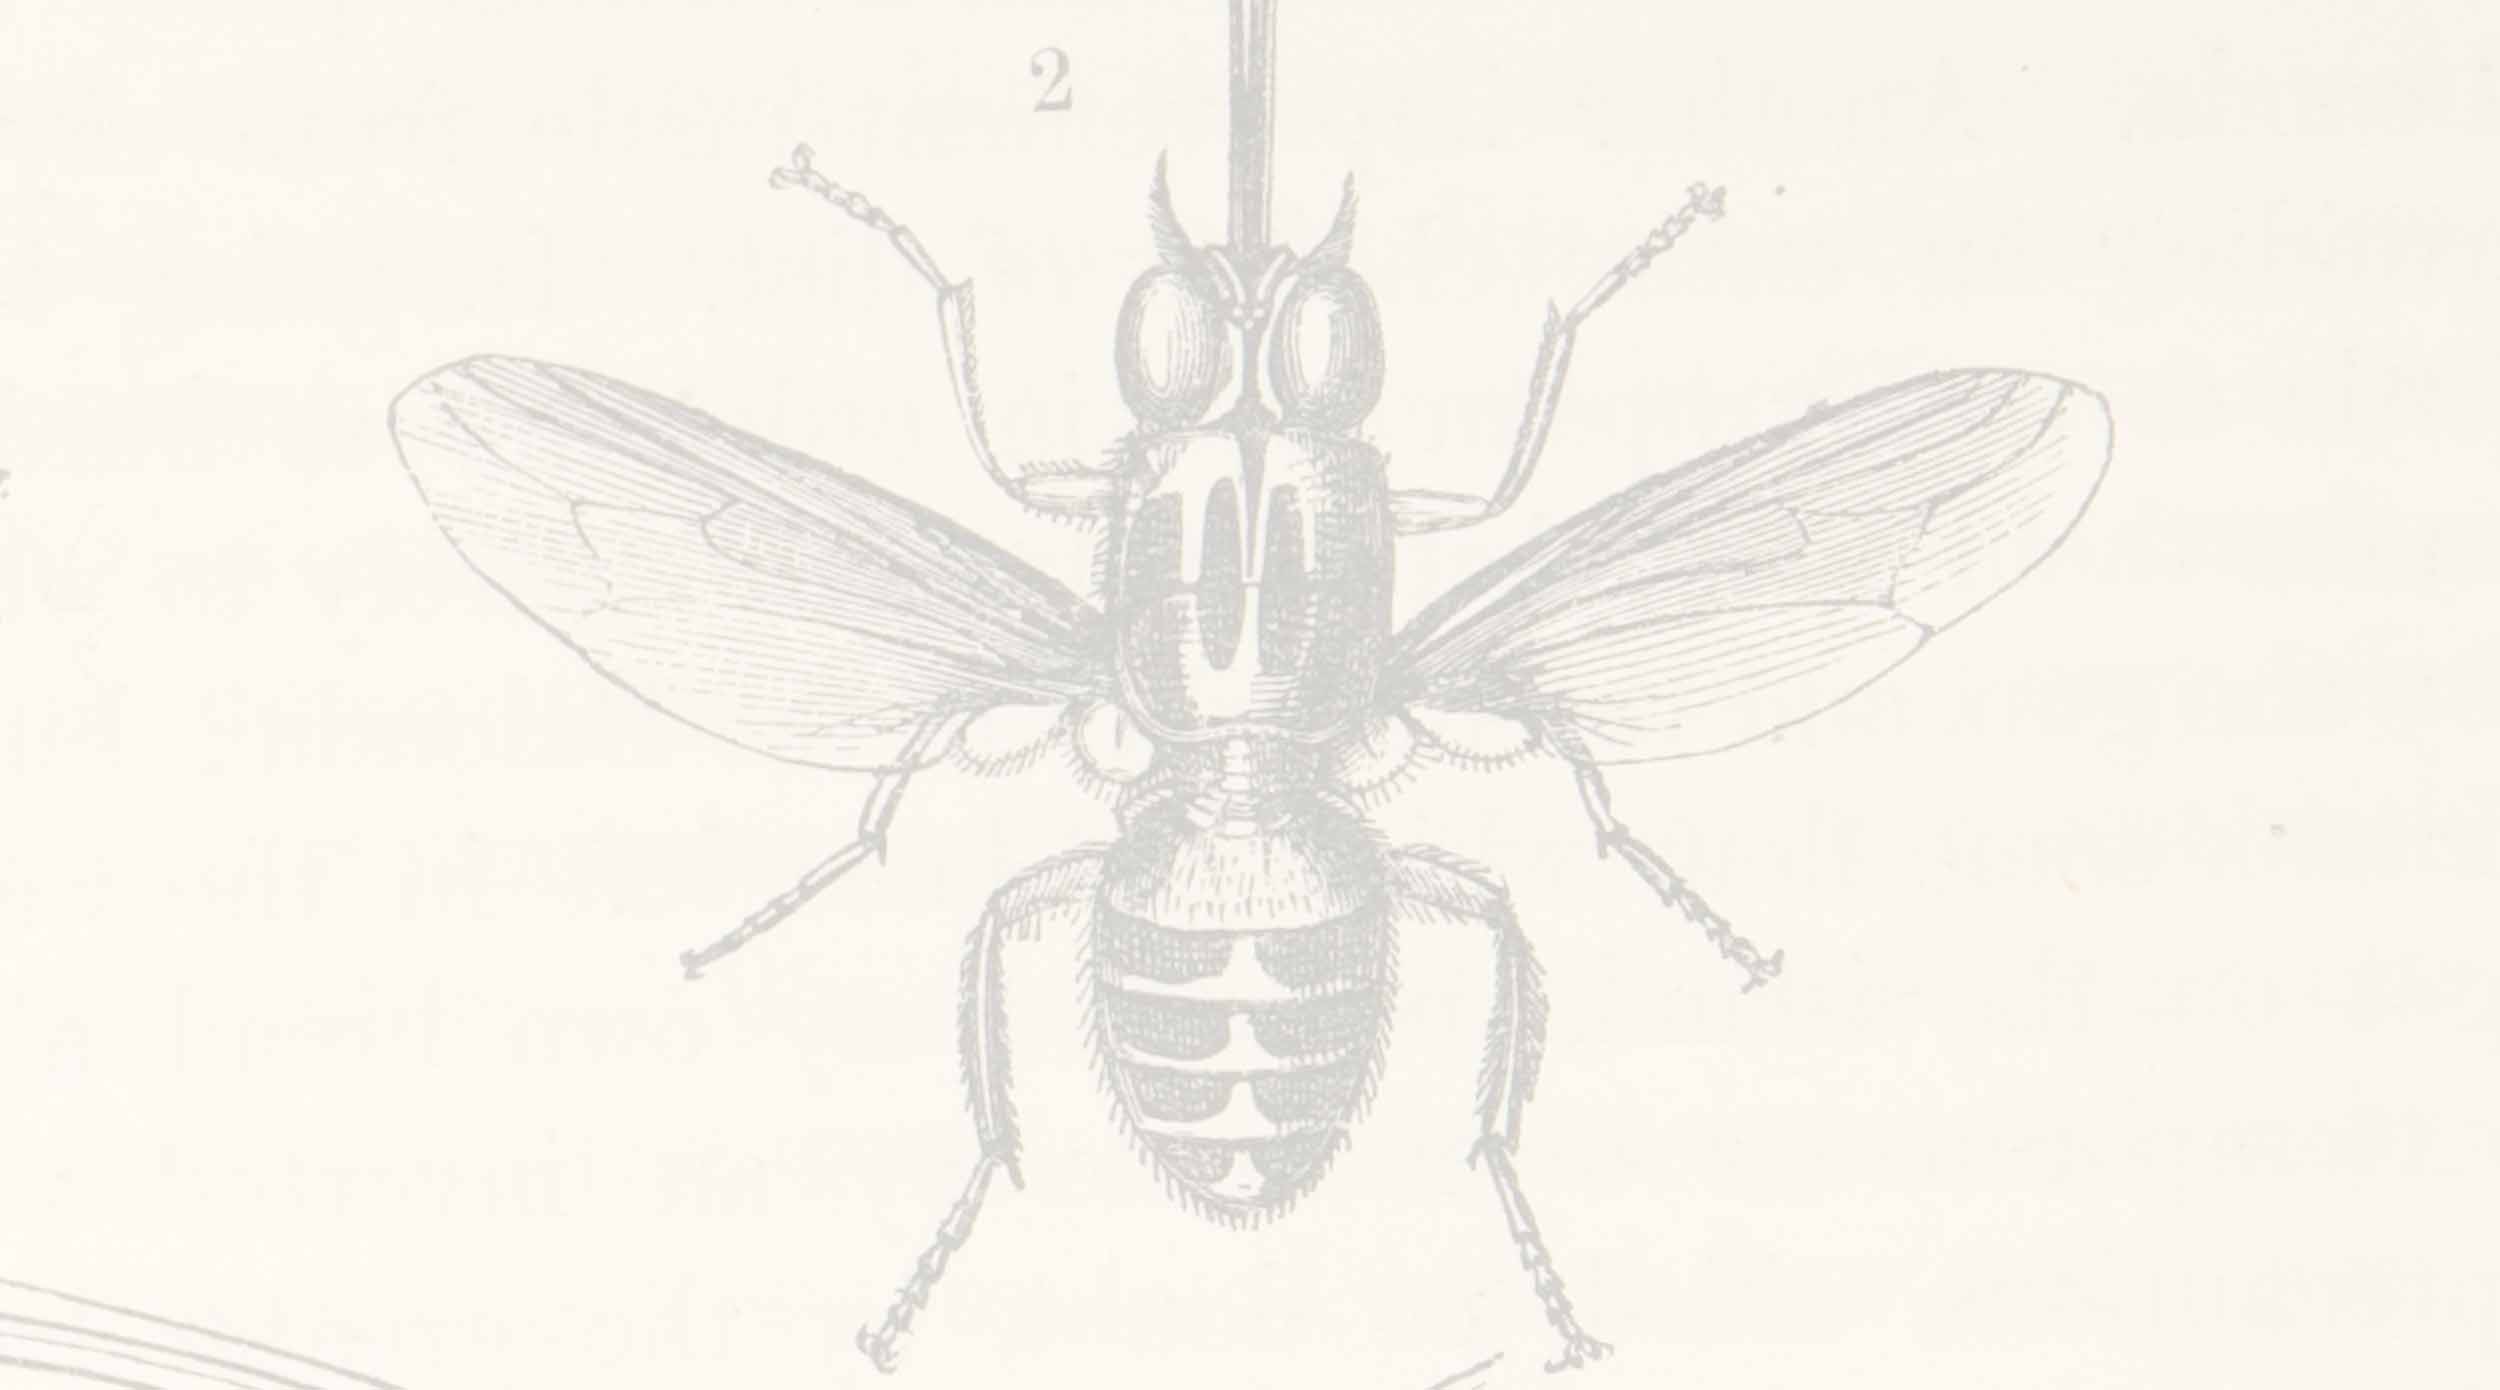 Tsetse fly, Missionary Travels, 1857. Copyright Royal Geographical Society (with IBG). Used by permission for academic purposes only. For non-academic use permission, please contact the Picture Library.